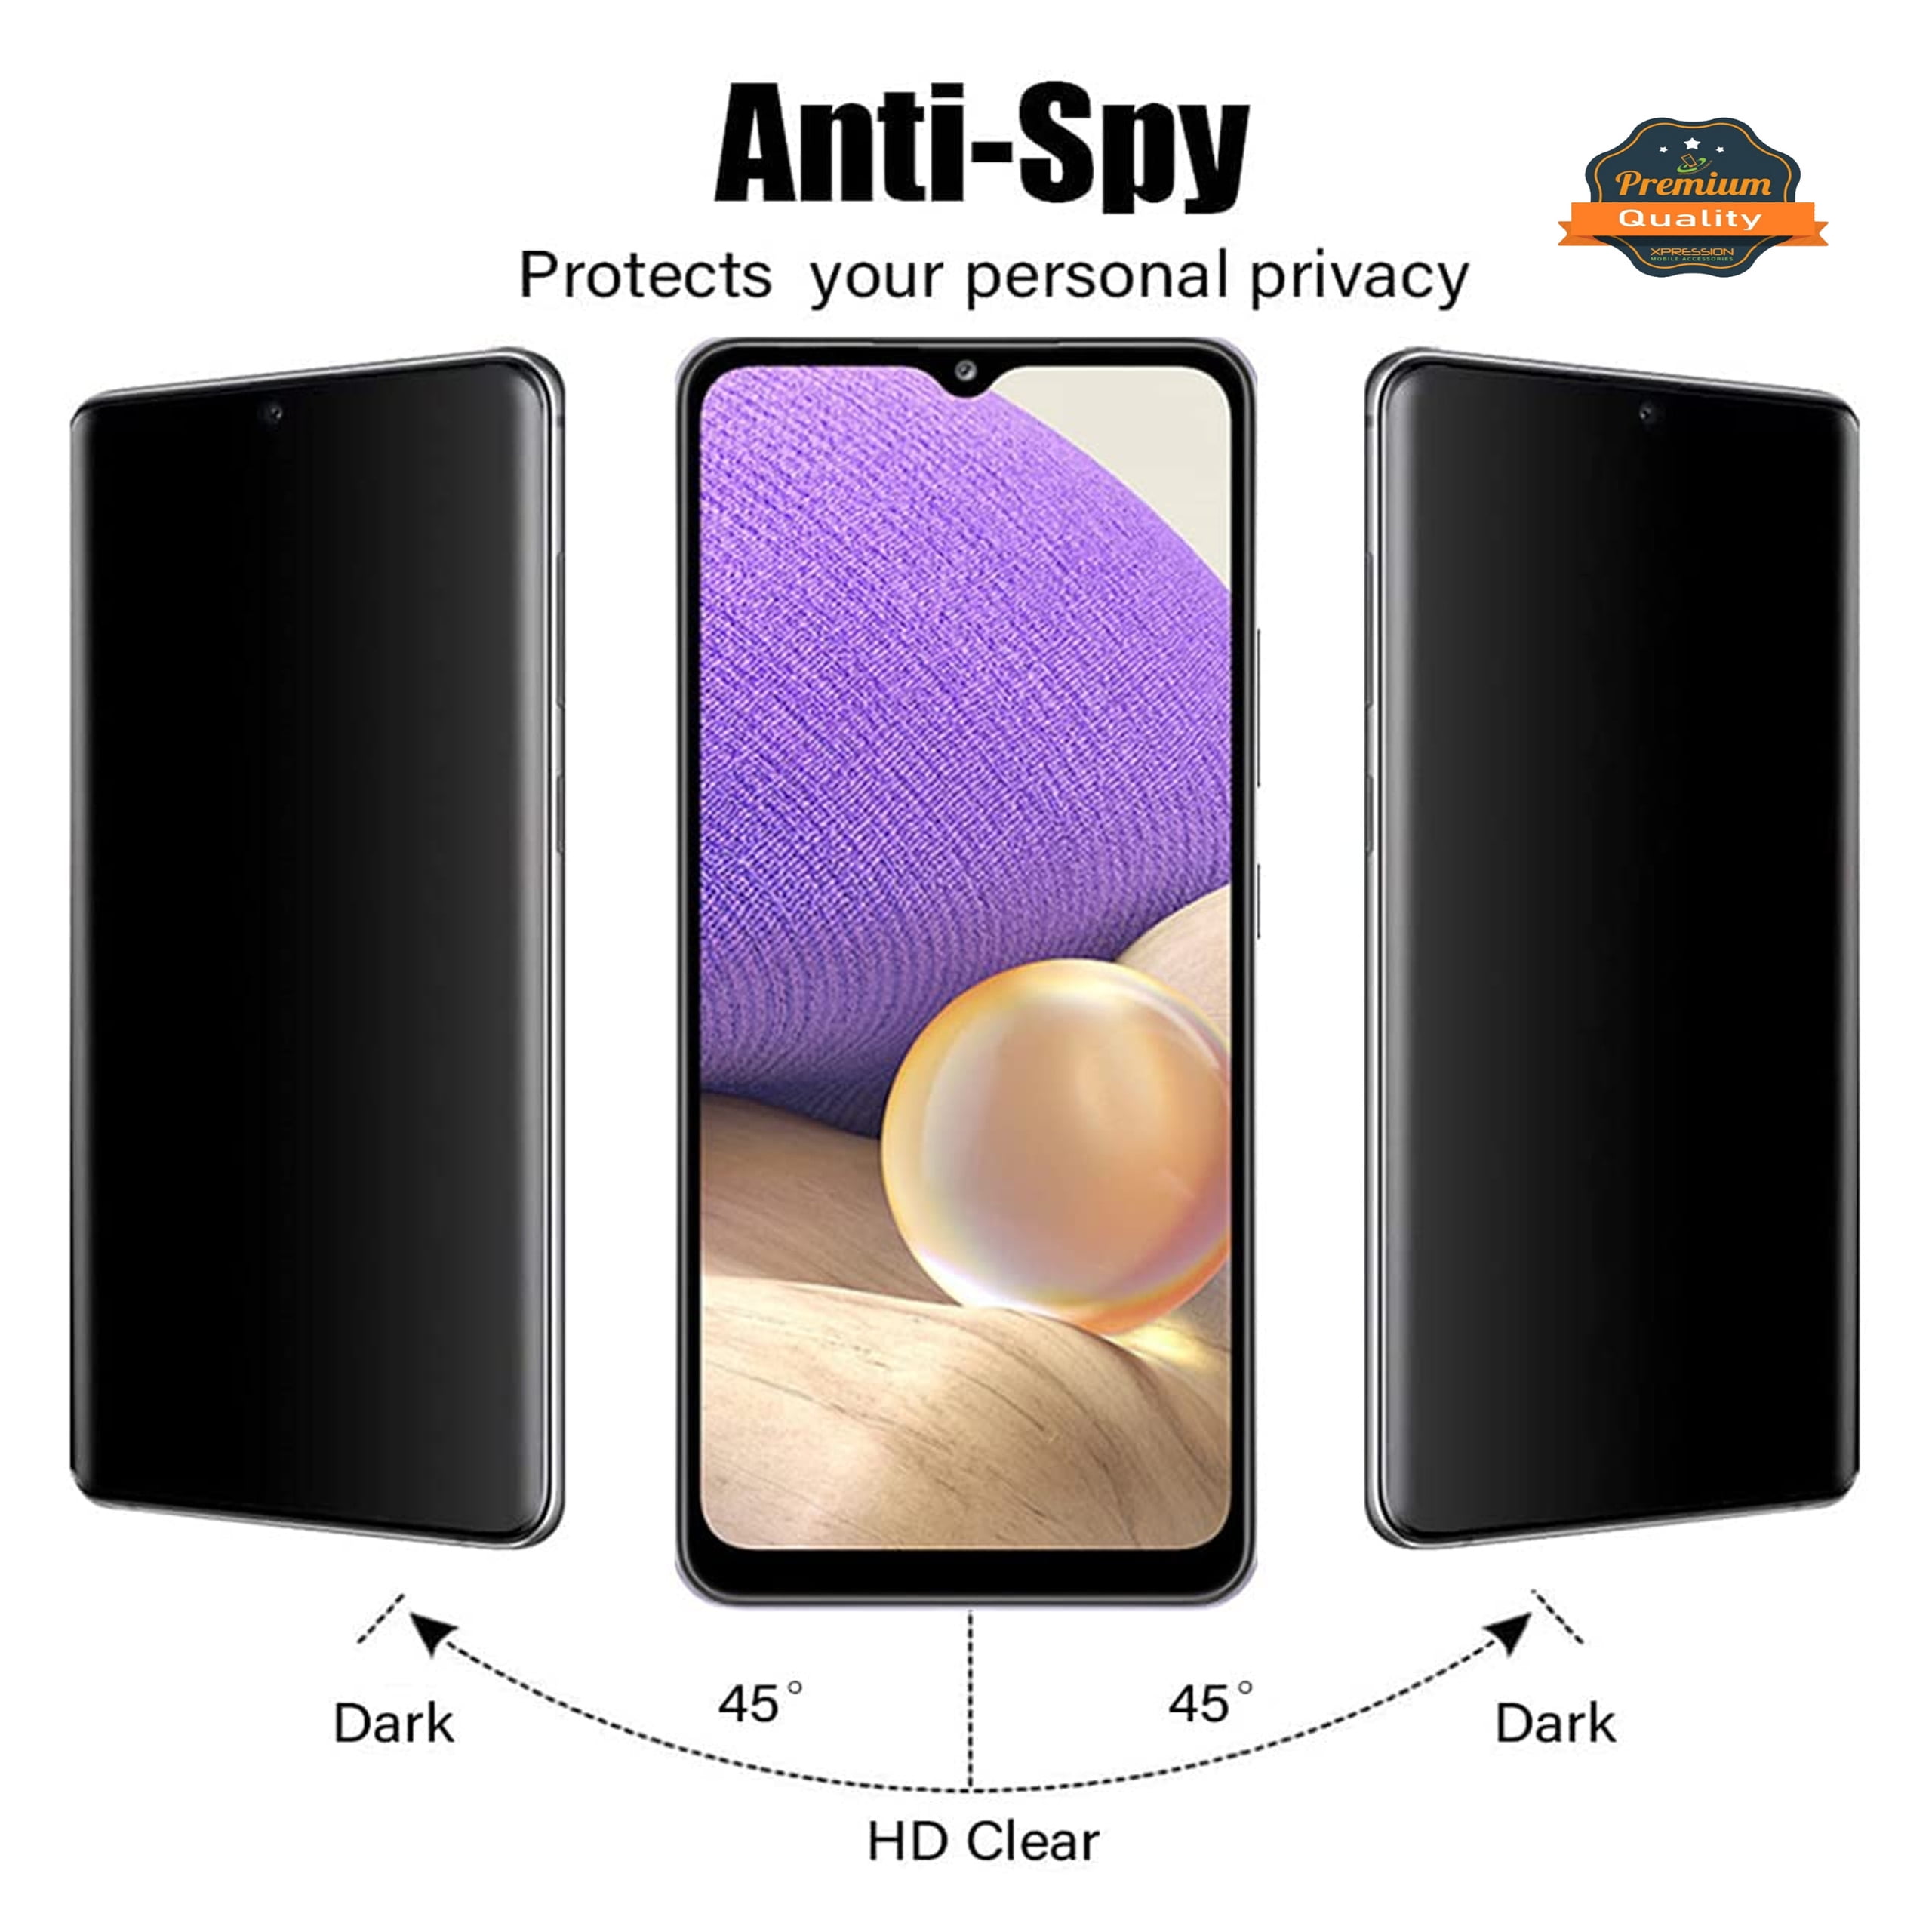 S23 Privacy Screen Protector